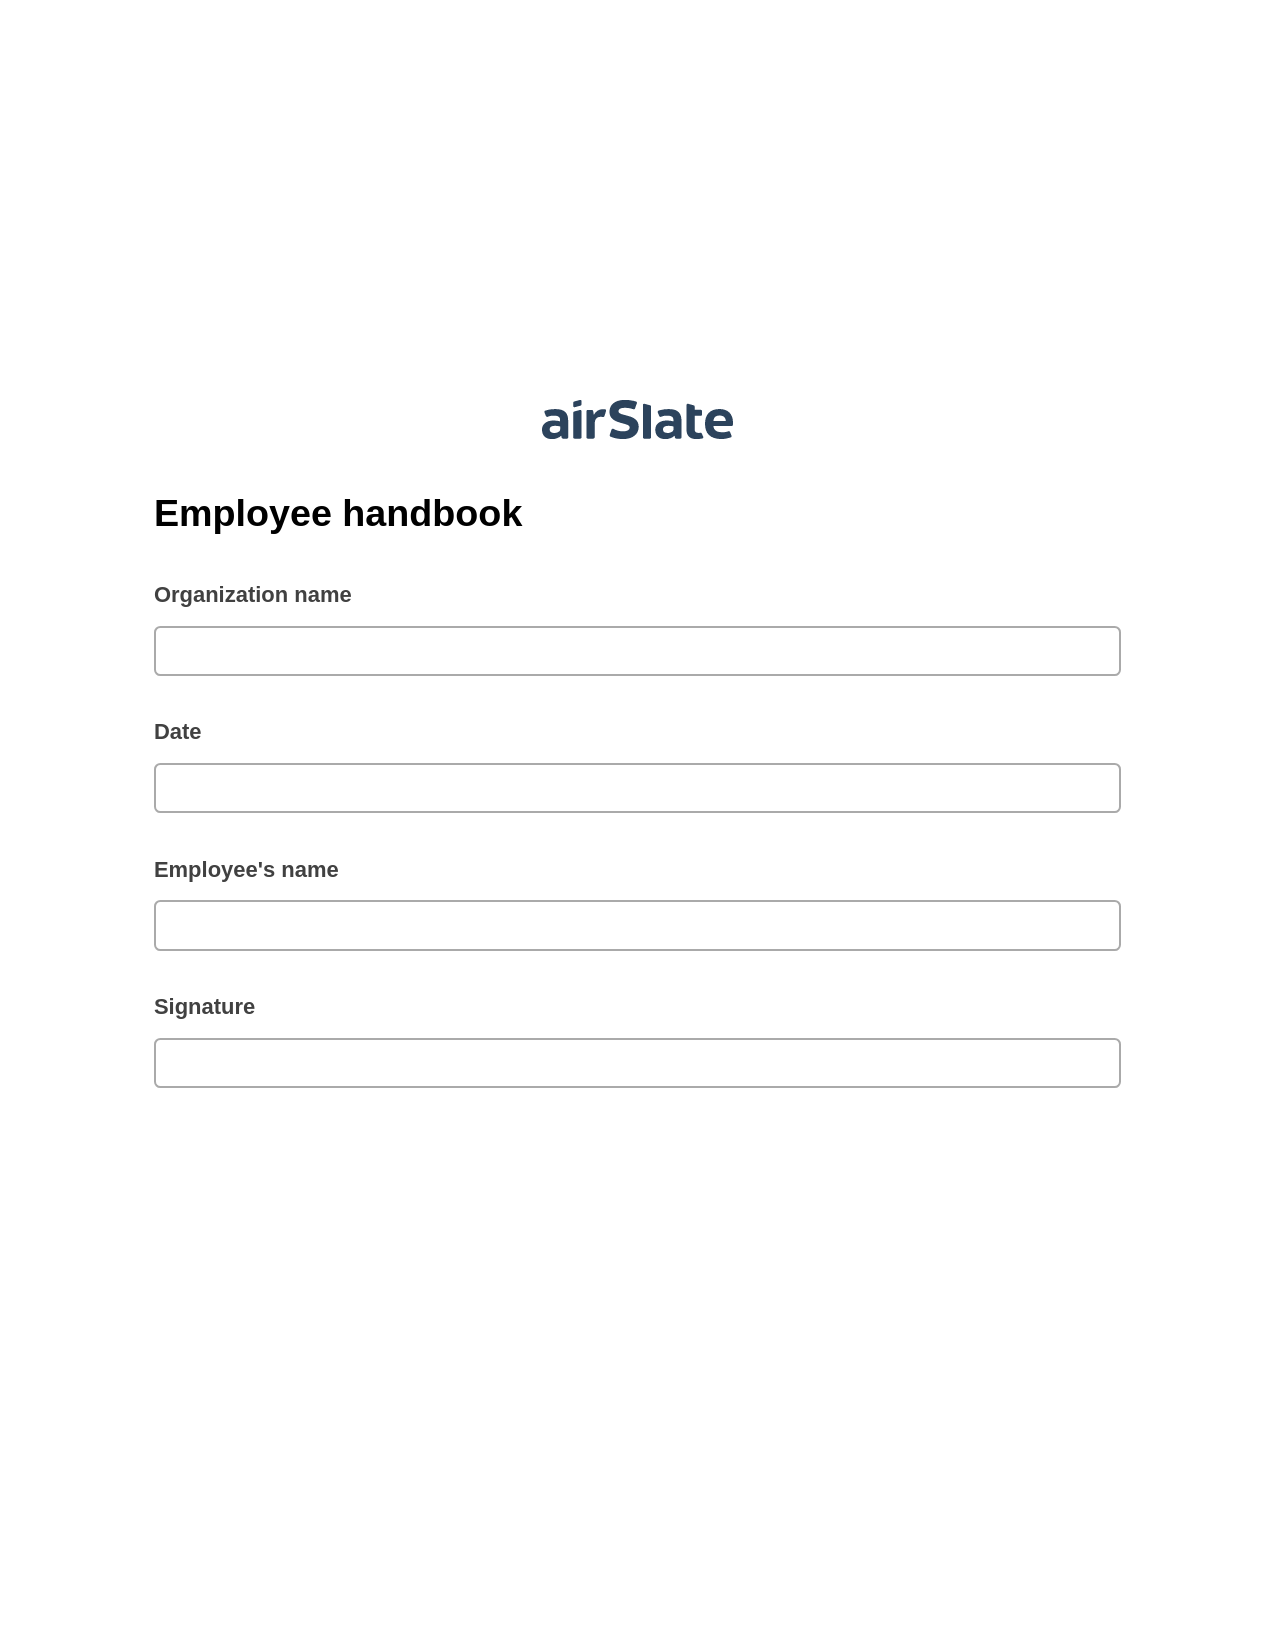 Employee handbook Pre-fill Dropdown from Airtable, Roles Reminder Bot, OneDrive Bot